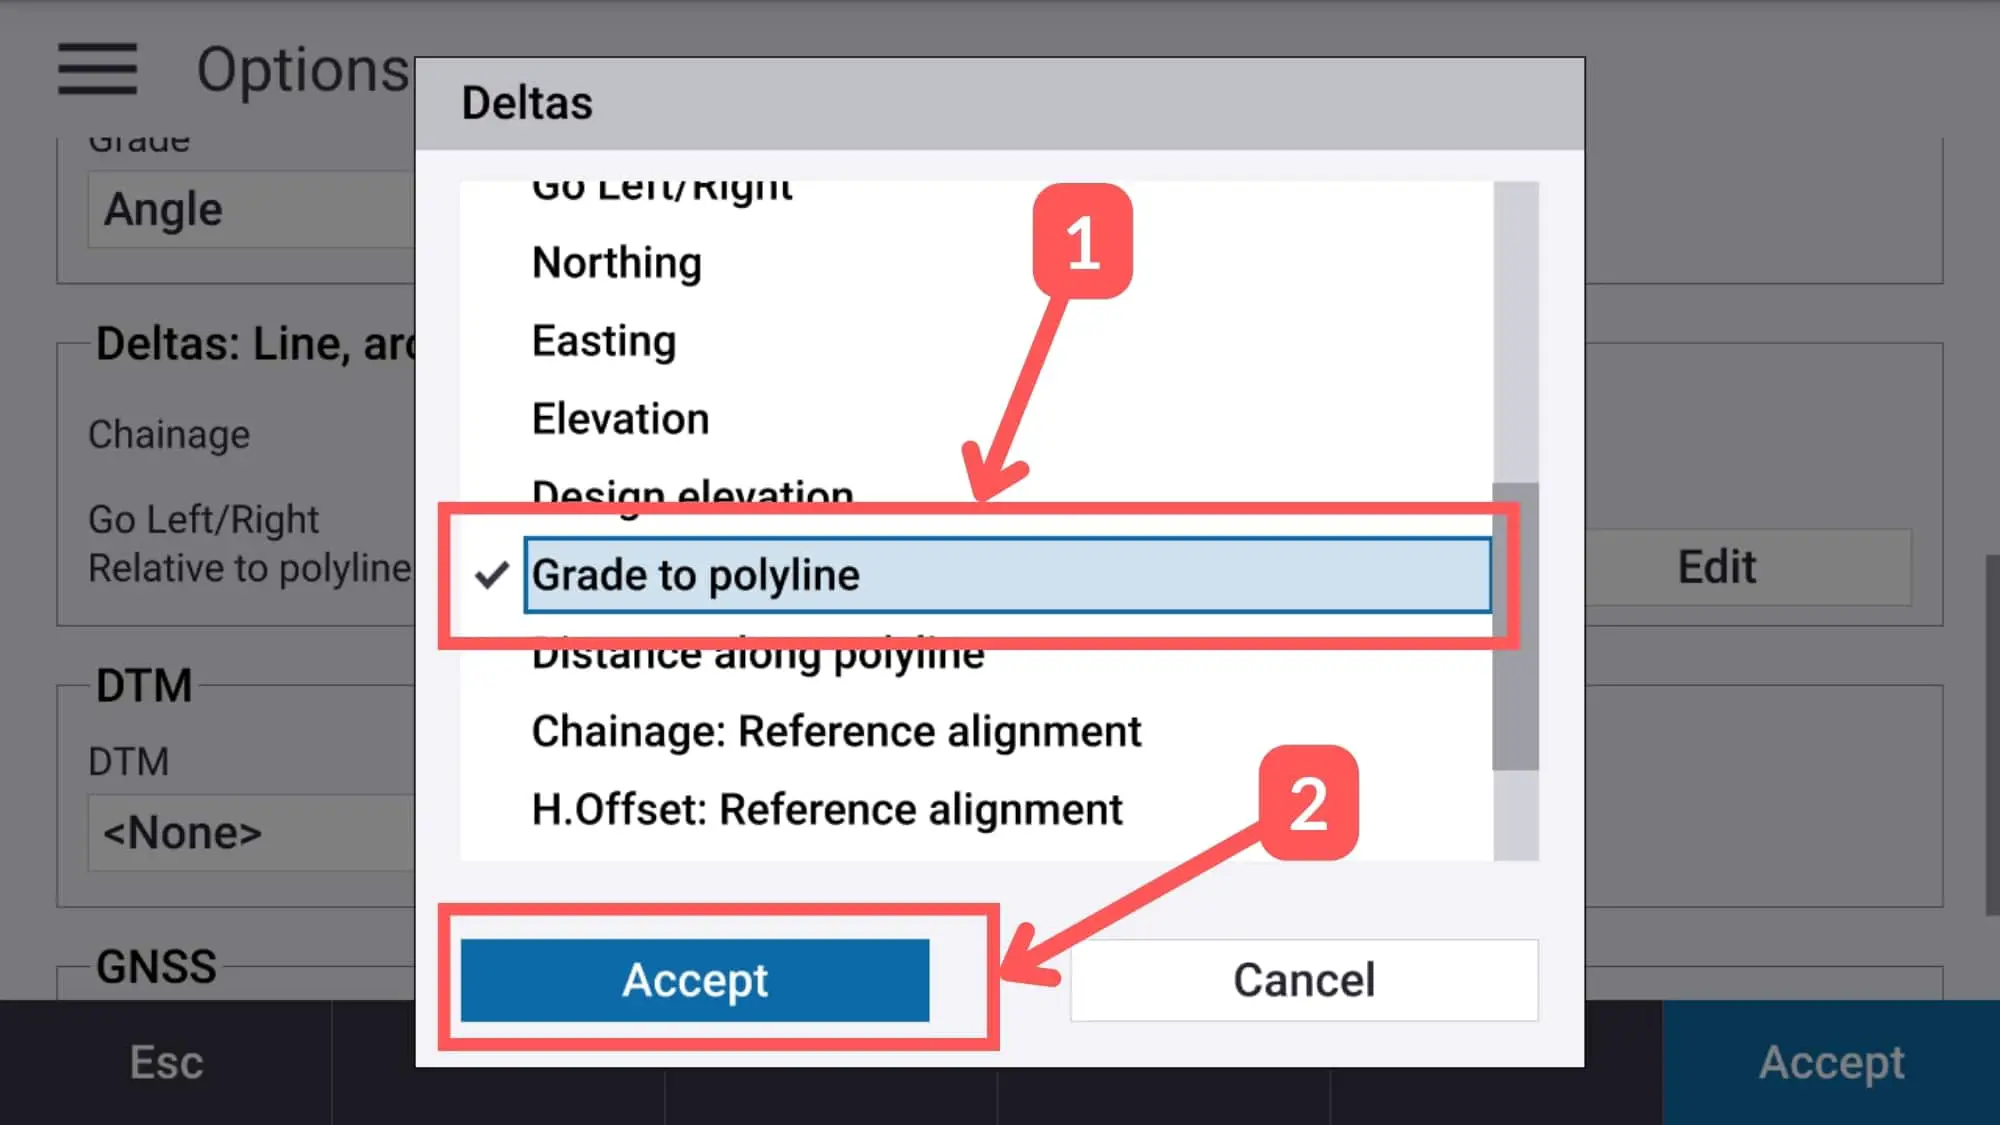 Select grade to line or polyline to display on the tsc5 1